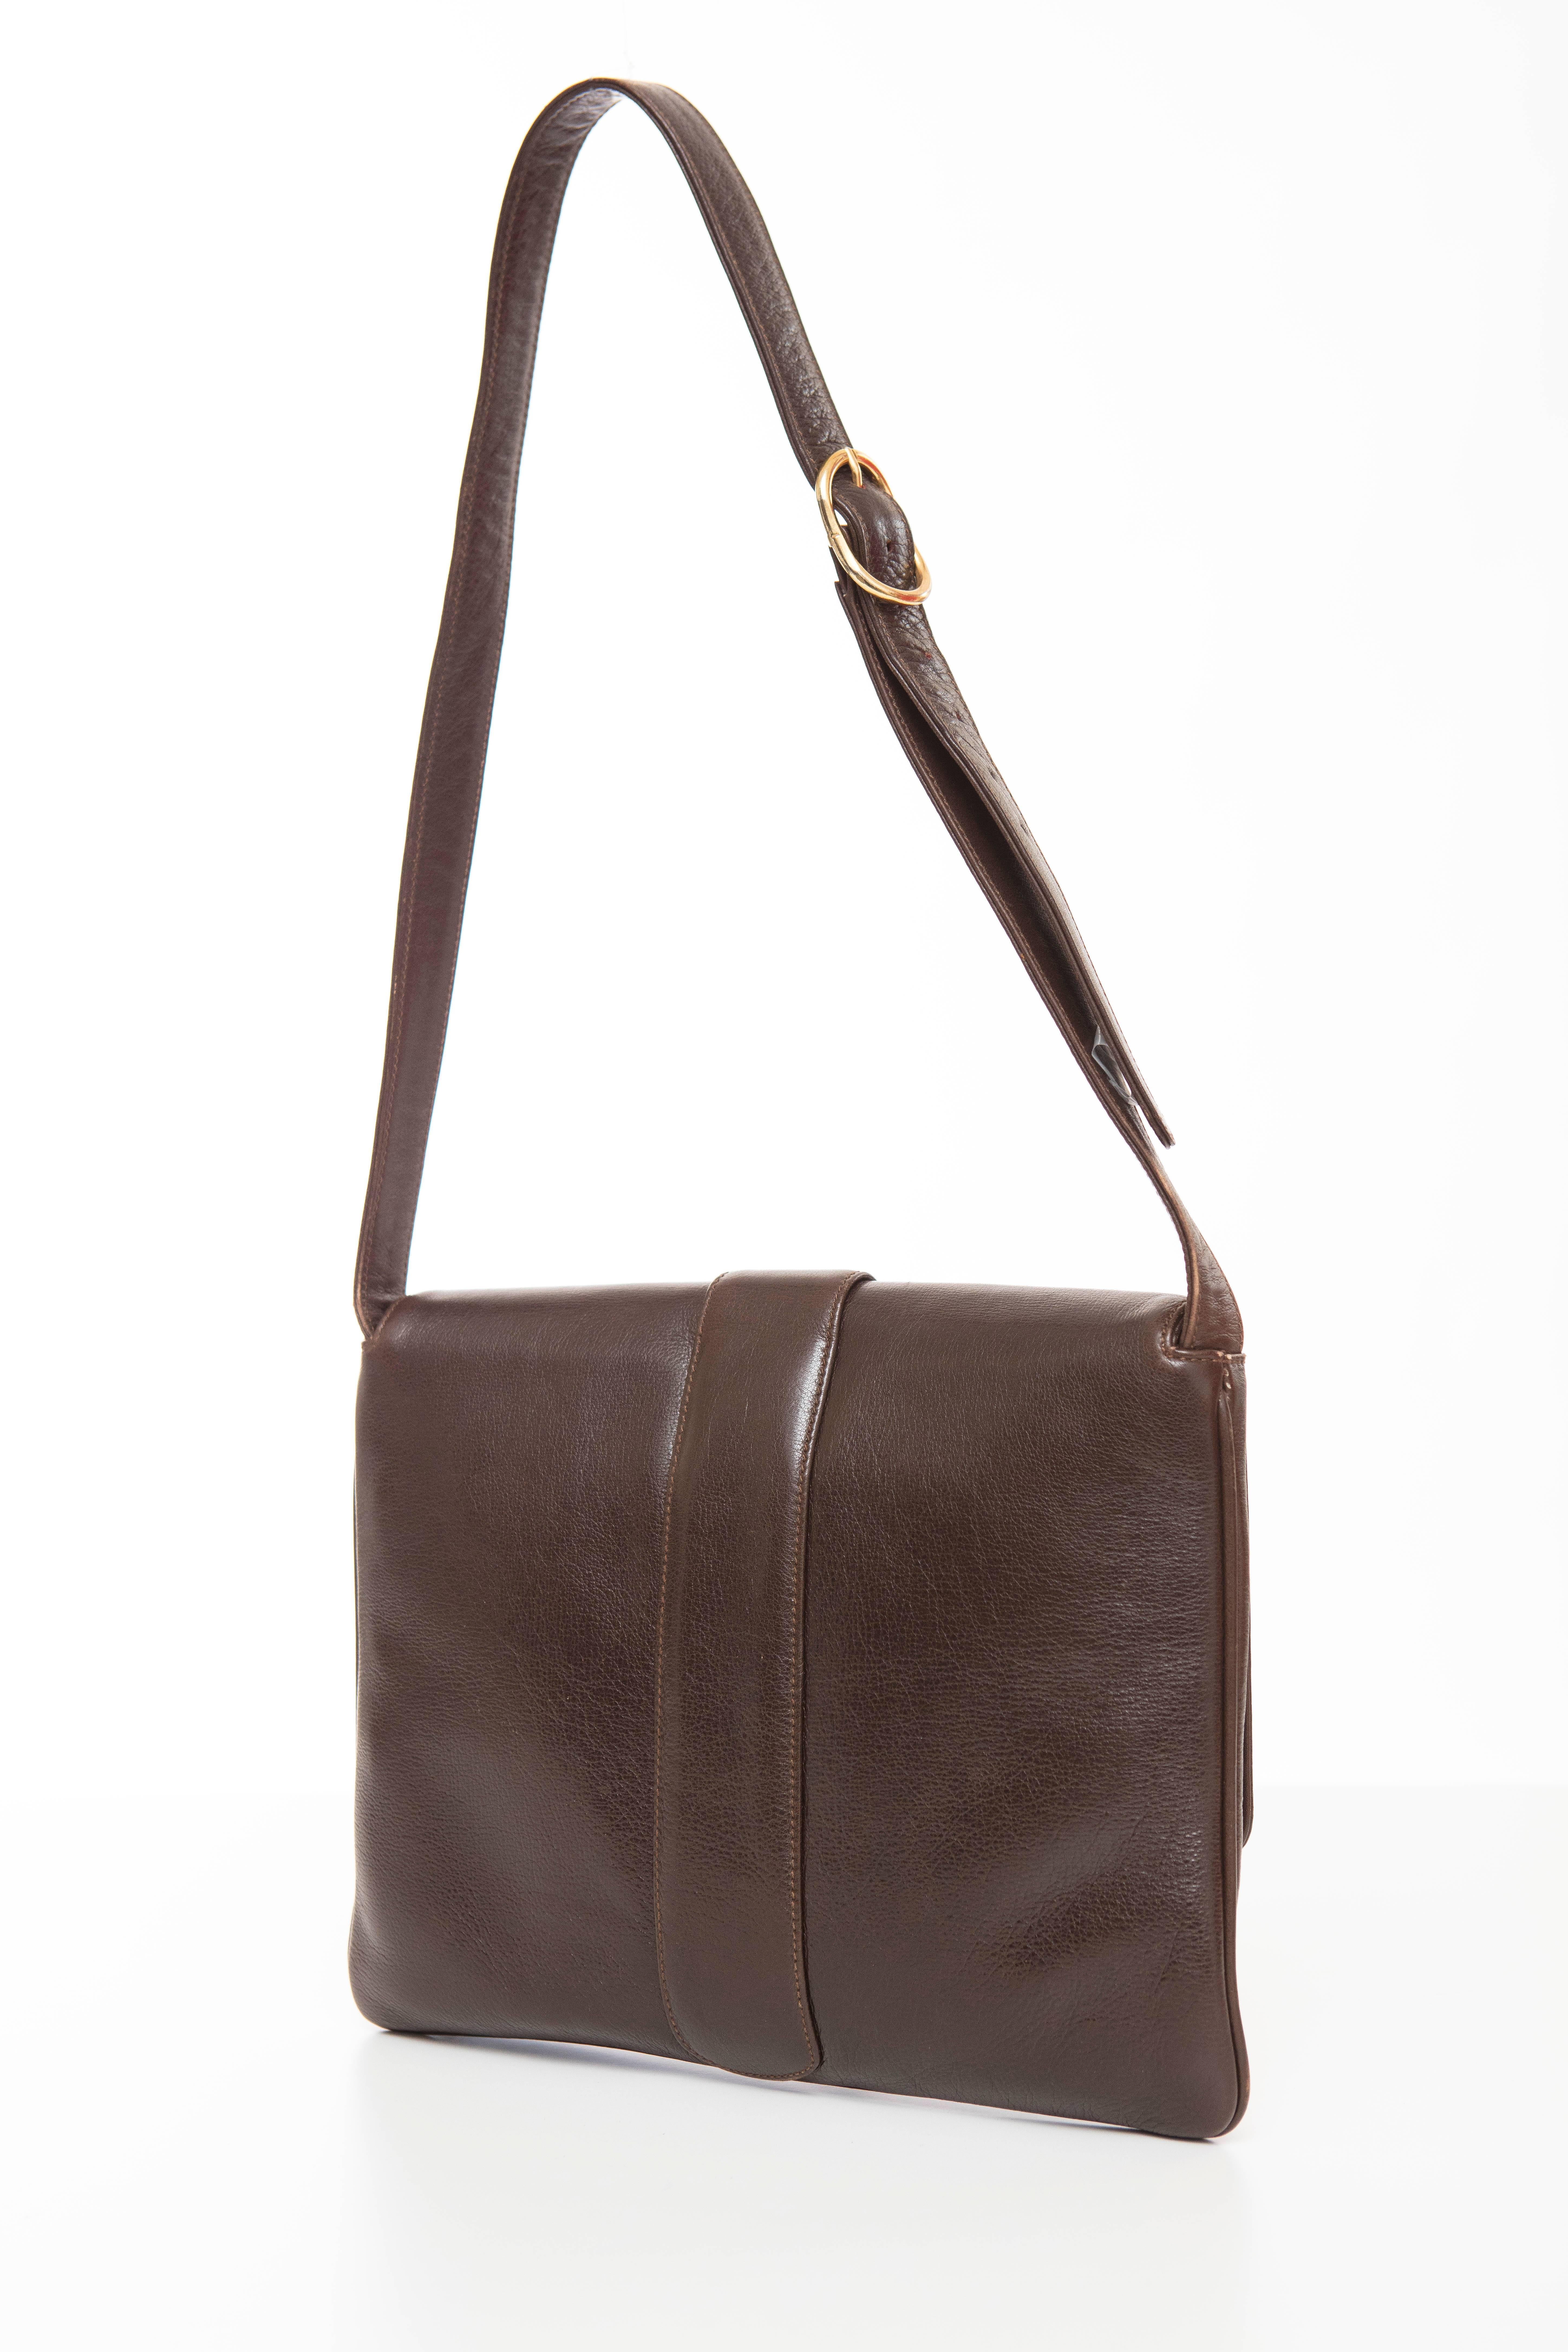 Women's Gucci Brown Leather Shoulder Bag With Adjustable Strap, Circa 1970's